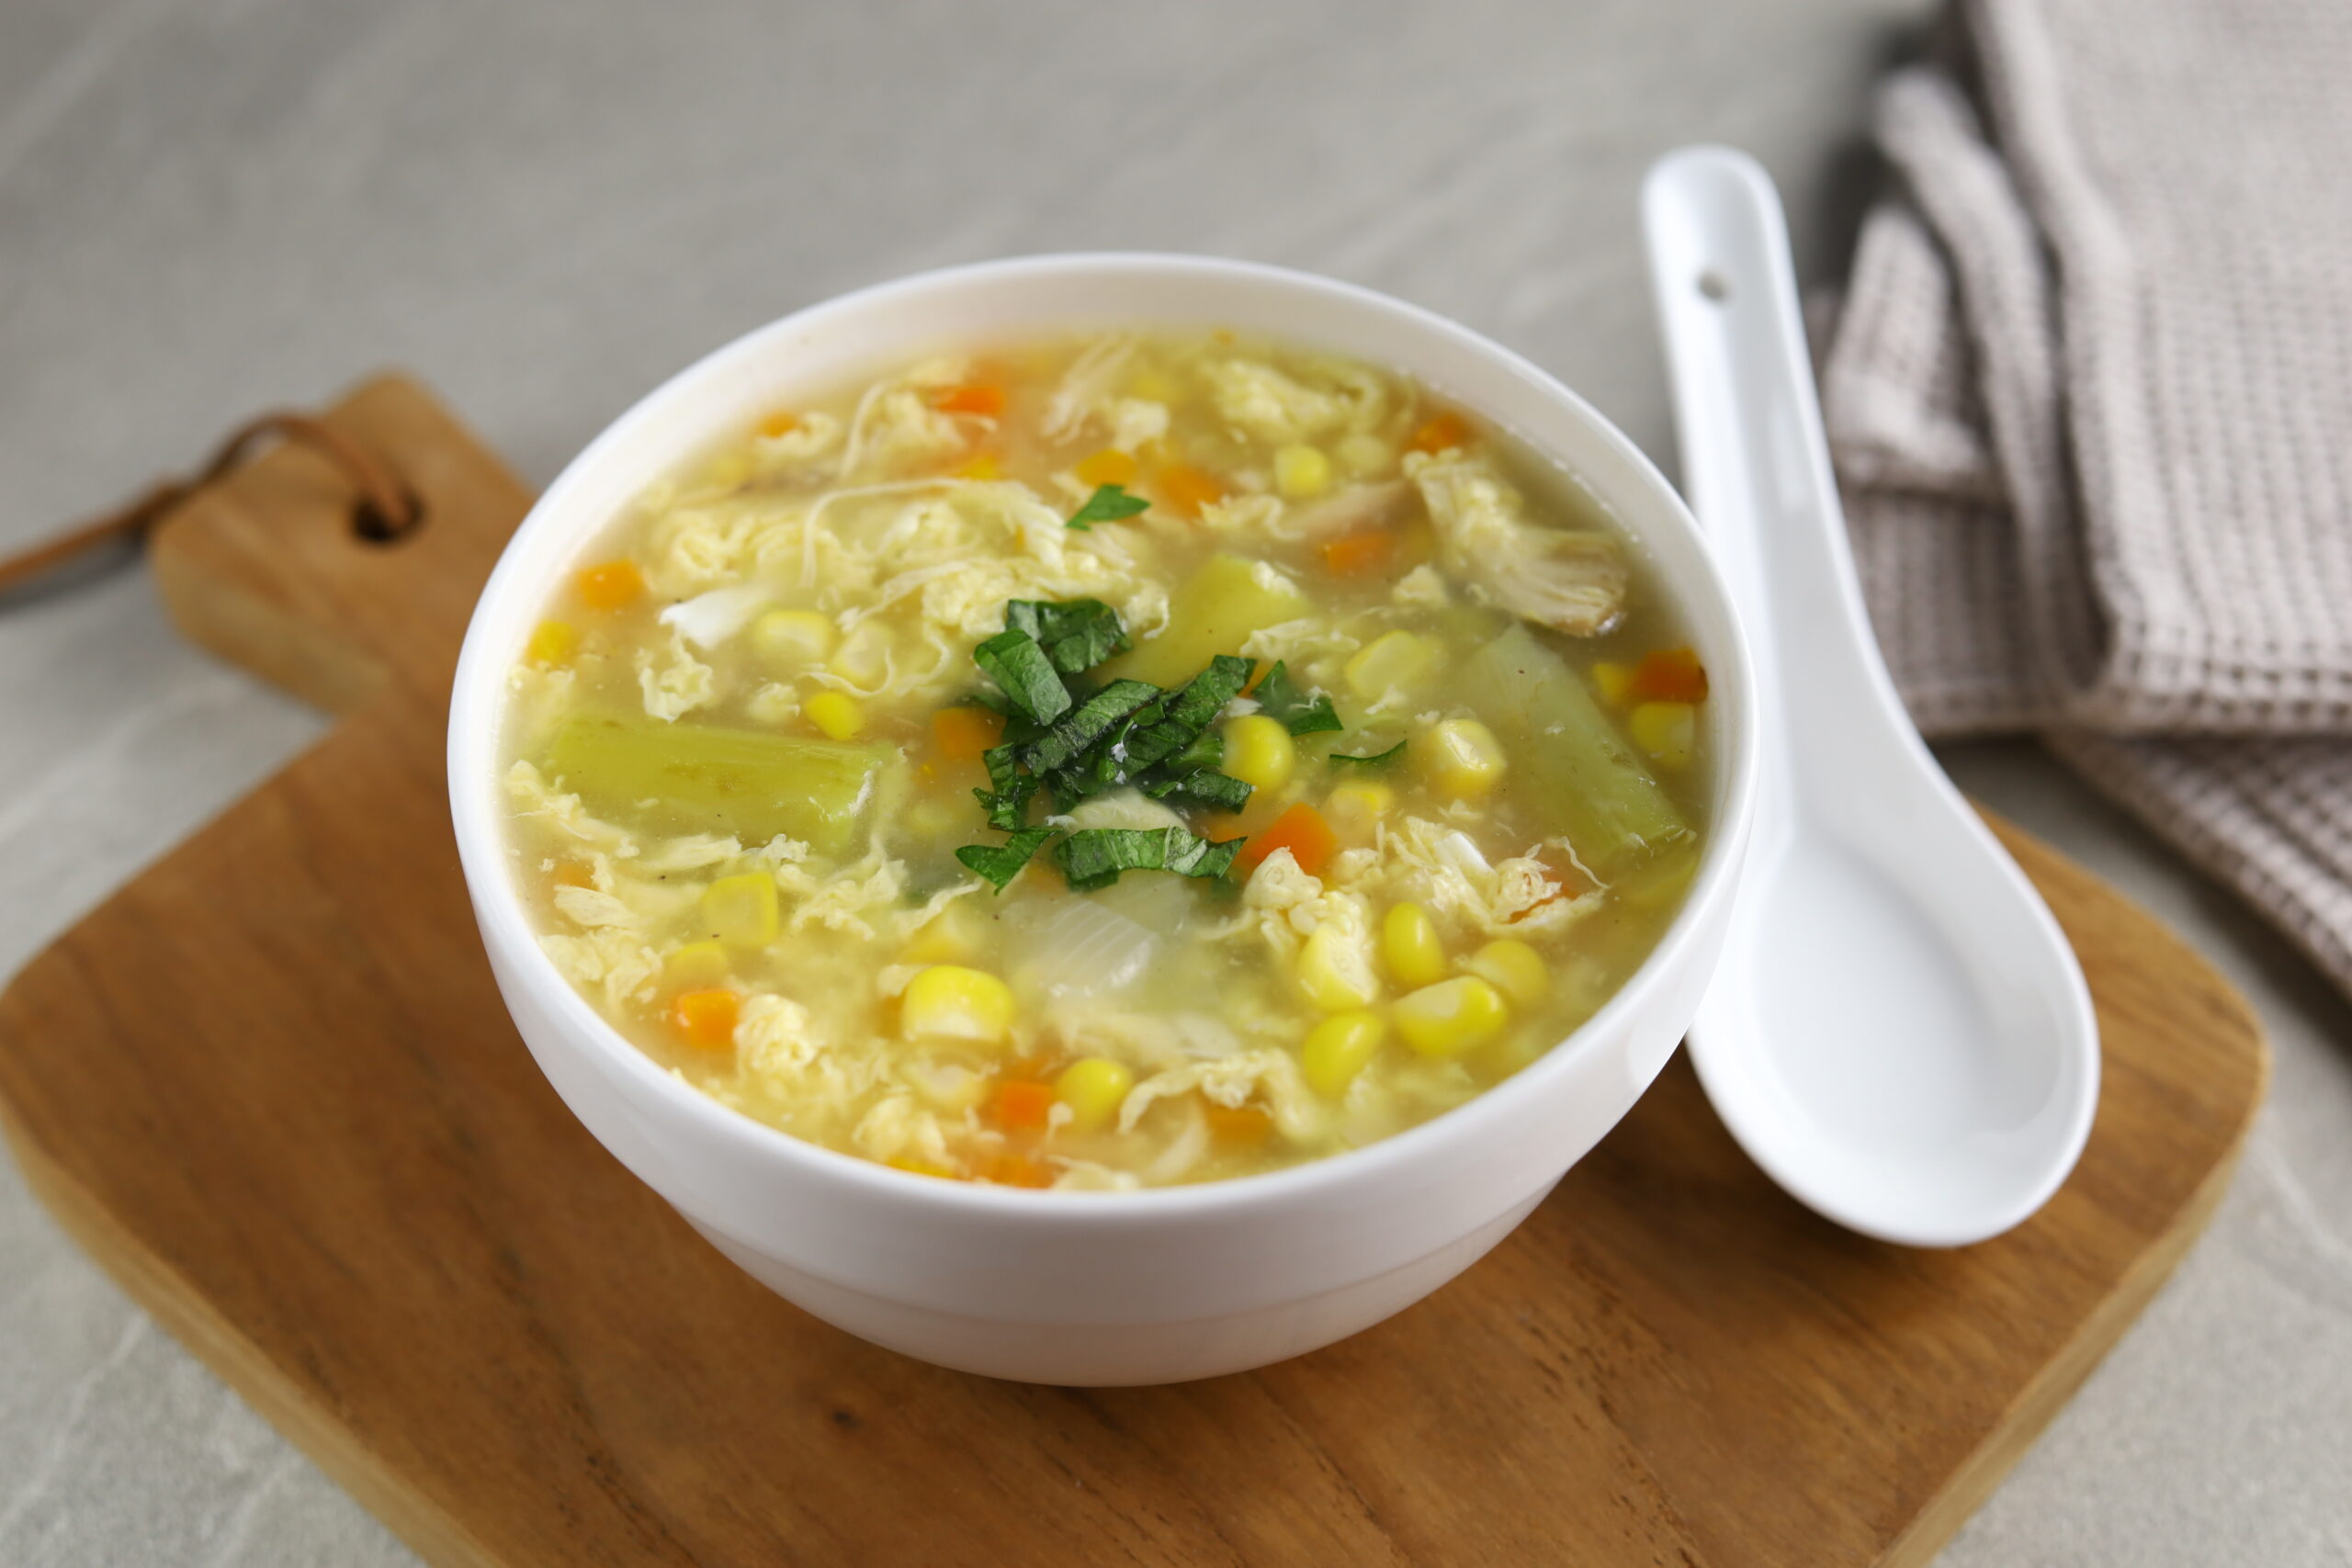 How to Make Delicious Egg Drop Soup?